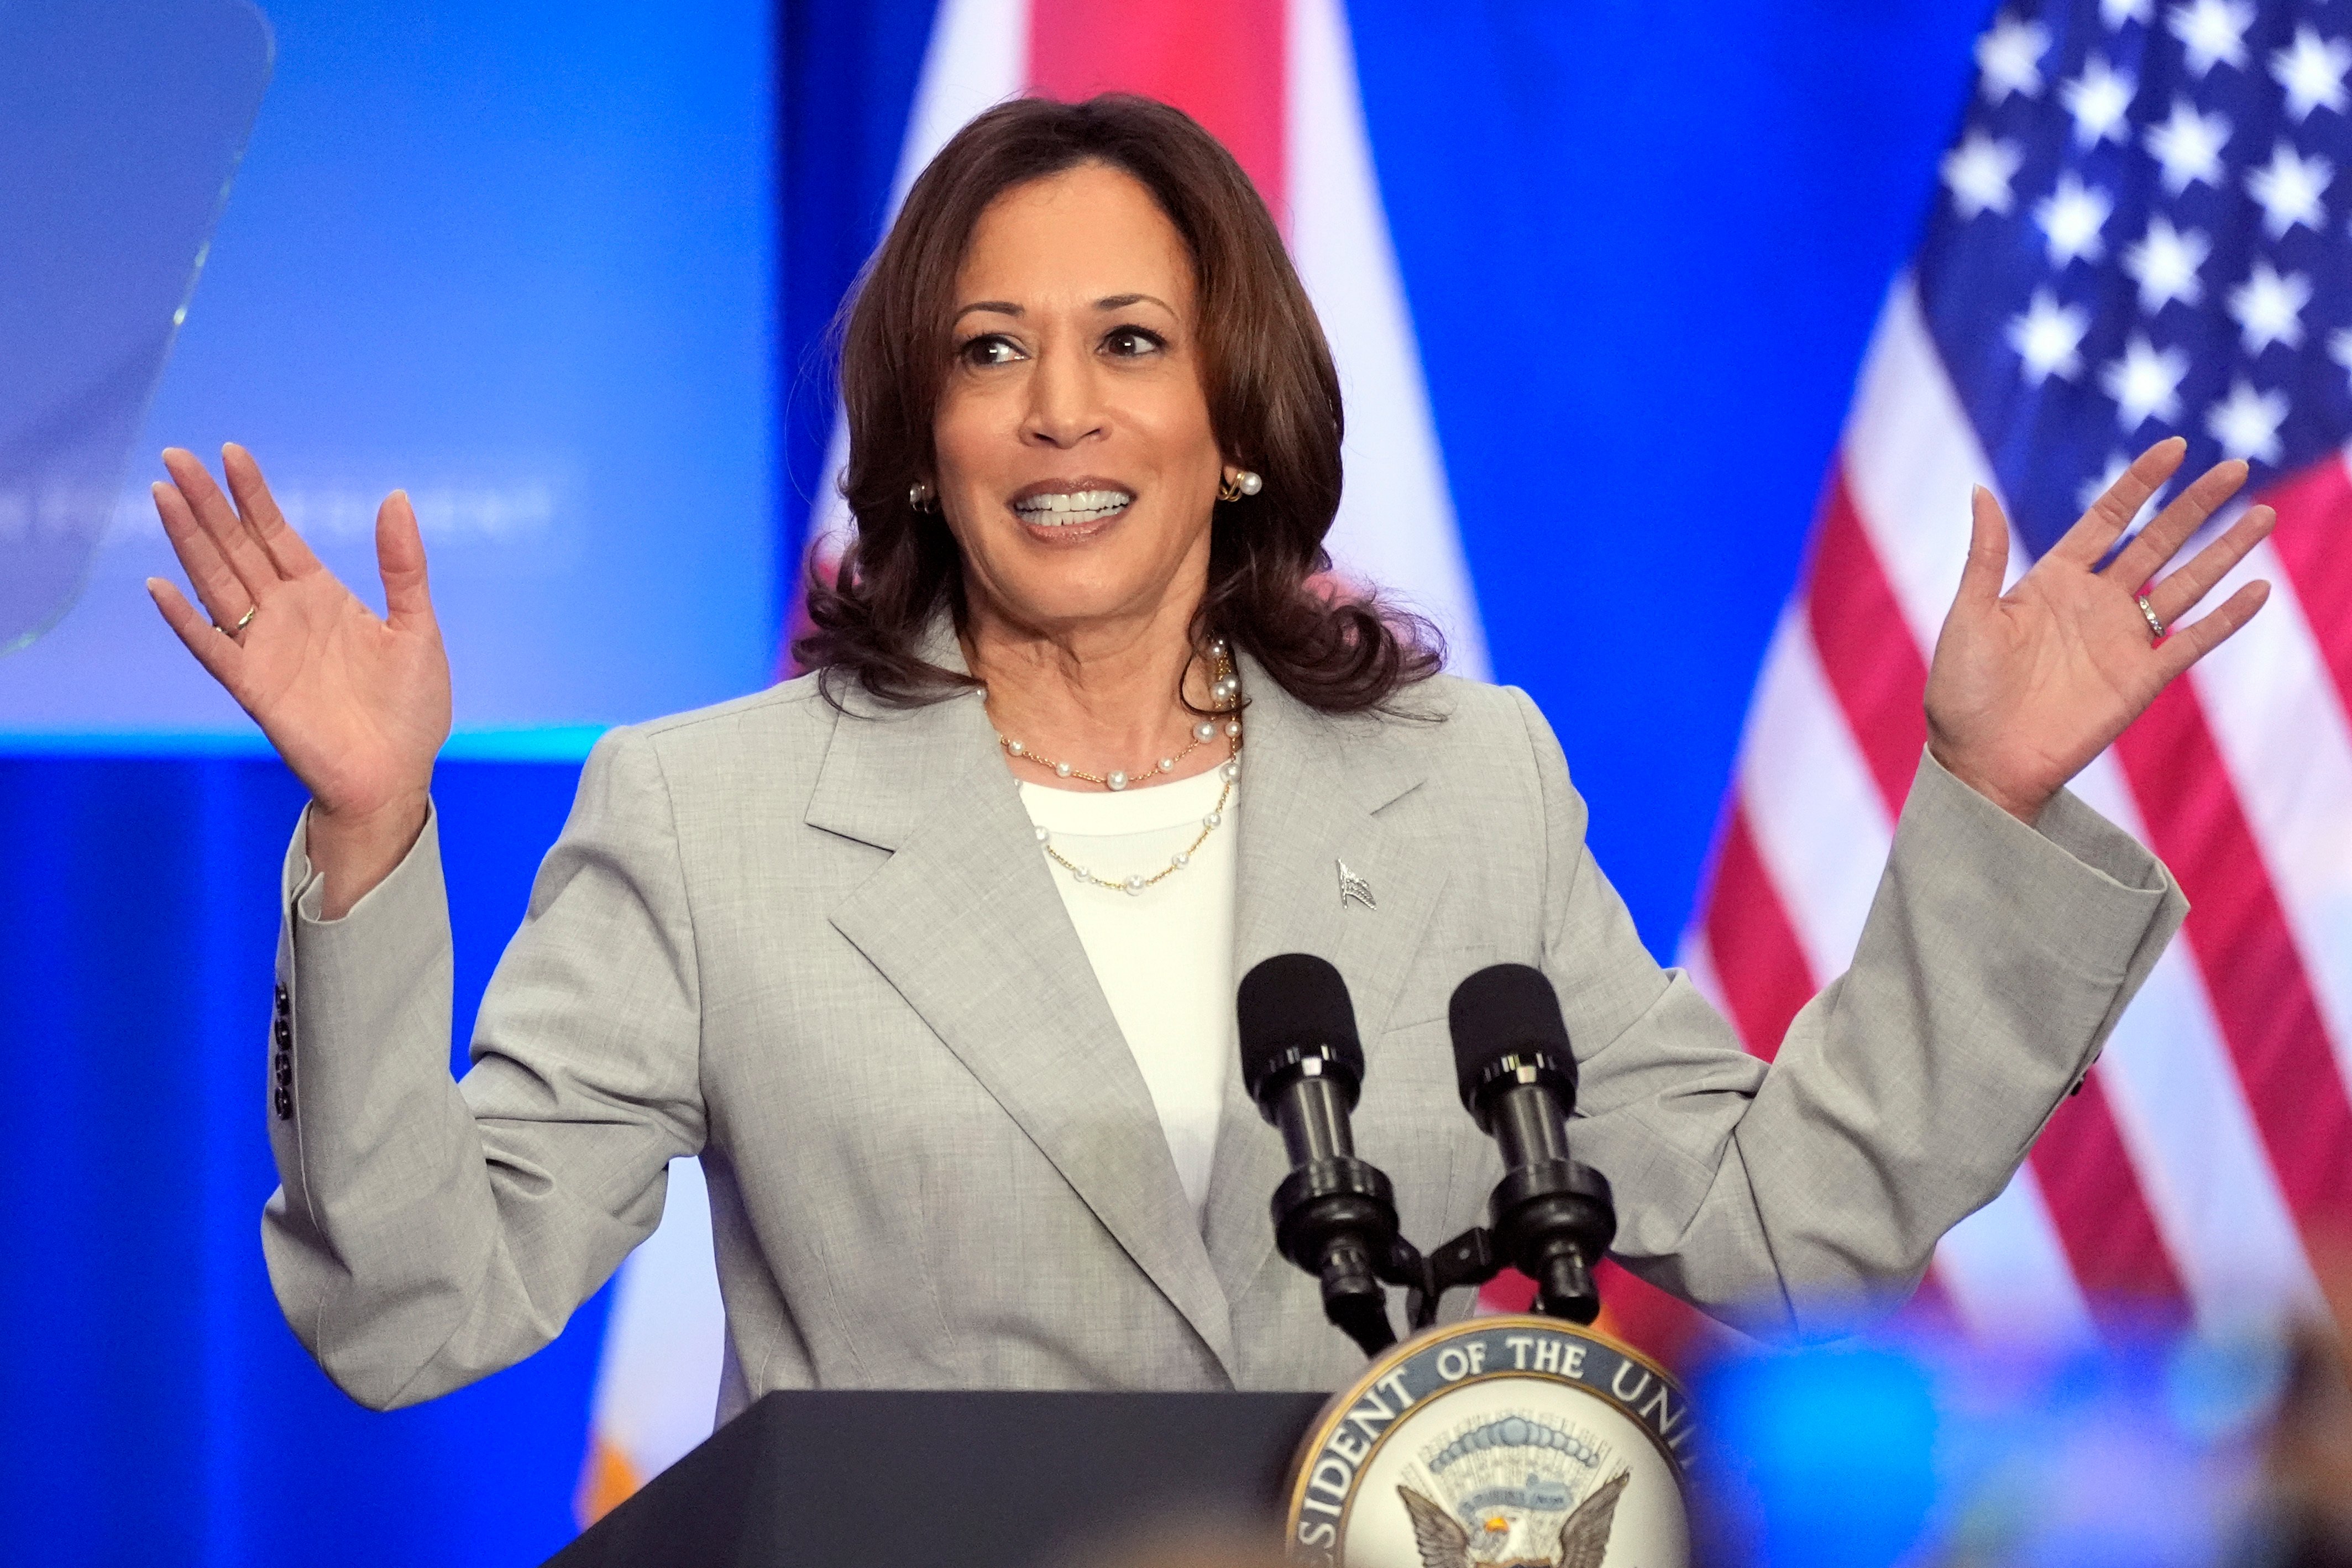 FILE - Vice President Kamala Harris speaks at an event May 1, 2024, in Jacksonville, Fla. She’s already broken barriers, and now Harris could soon become the first Black woman to head a major party's presidential ticket after President Joe Biden’s ended his reelection bid. The 59-year-old Harris was endorsed by Biden on Sunday, July 21, after he stepped aside amid widespread concerns about the viability of his candidacy. (AP Photo/John Raoux, File)